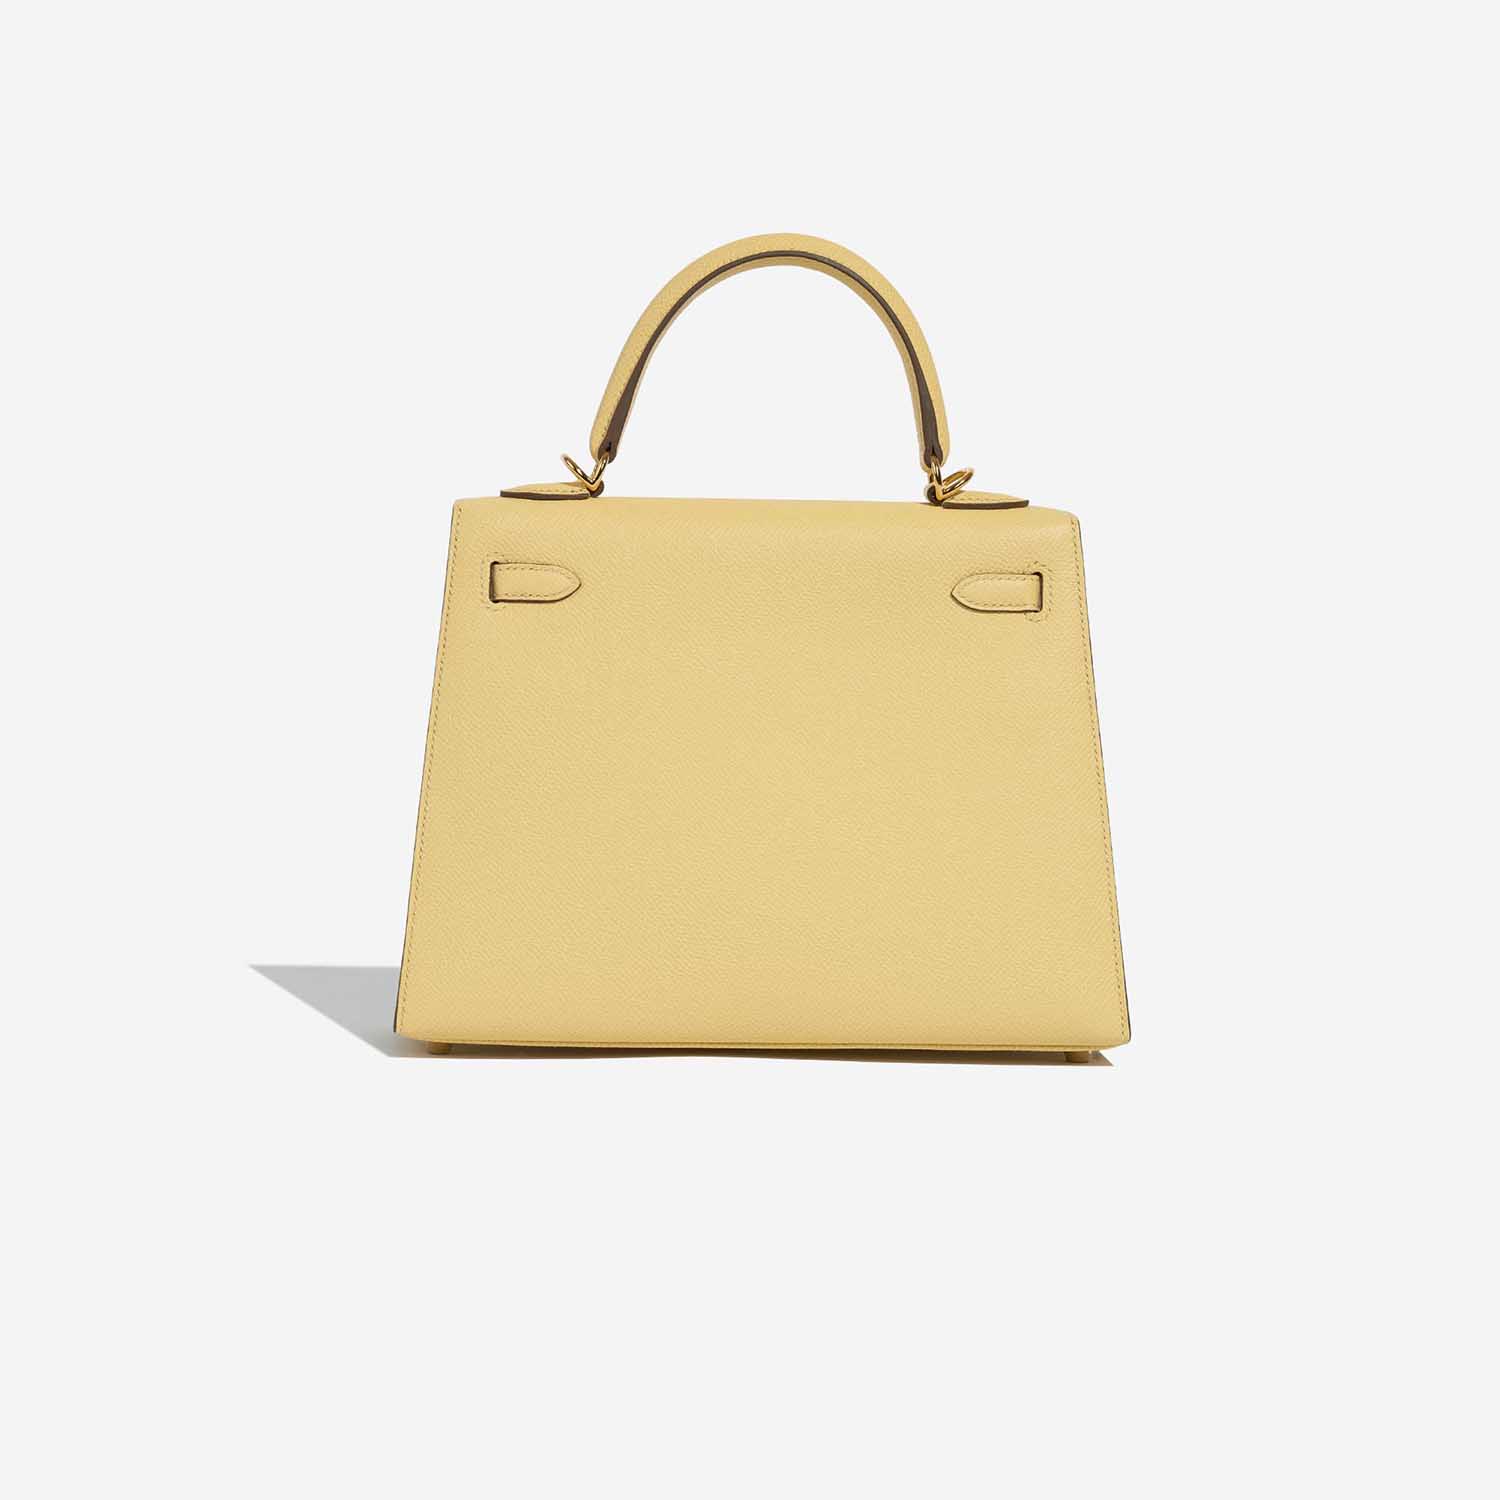 Hermes Garden Party 30 Bag Jaune Poussin Tote Epsom Leather